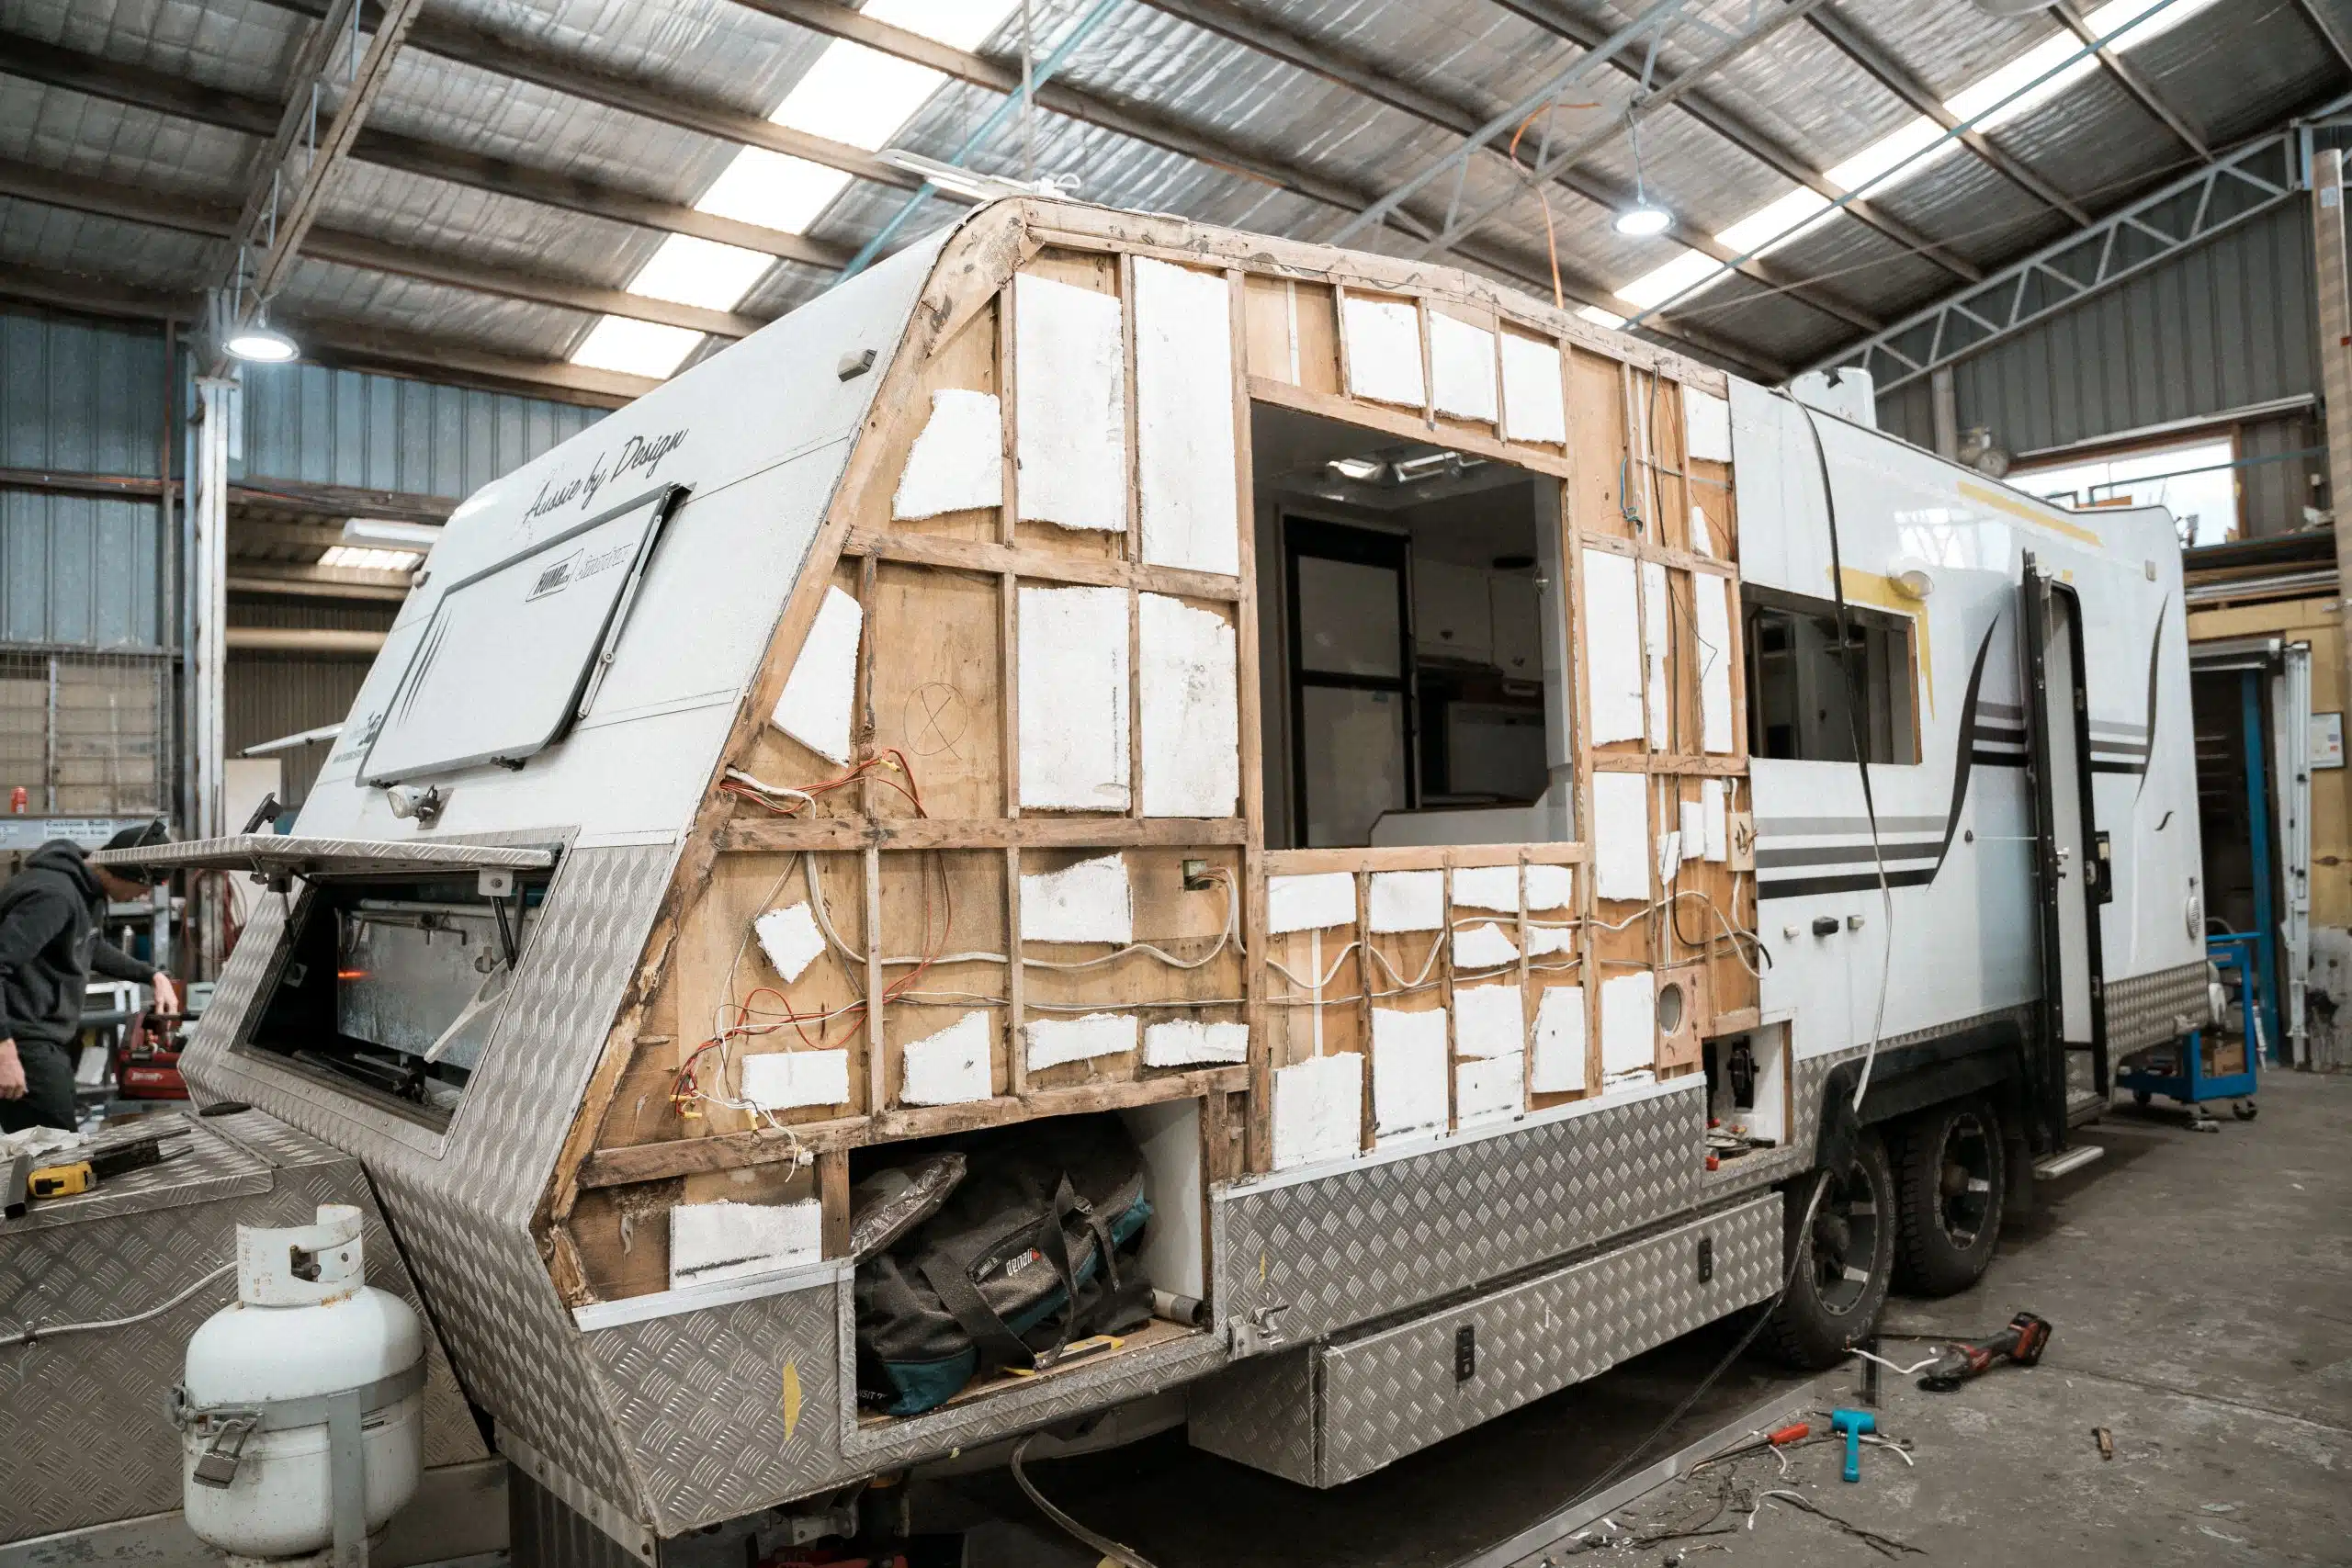 Protecting your caravan investment: Technician fixes exterior issues in a controlled environment